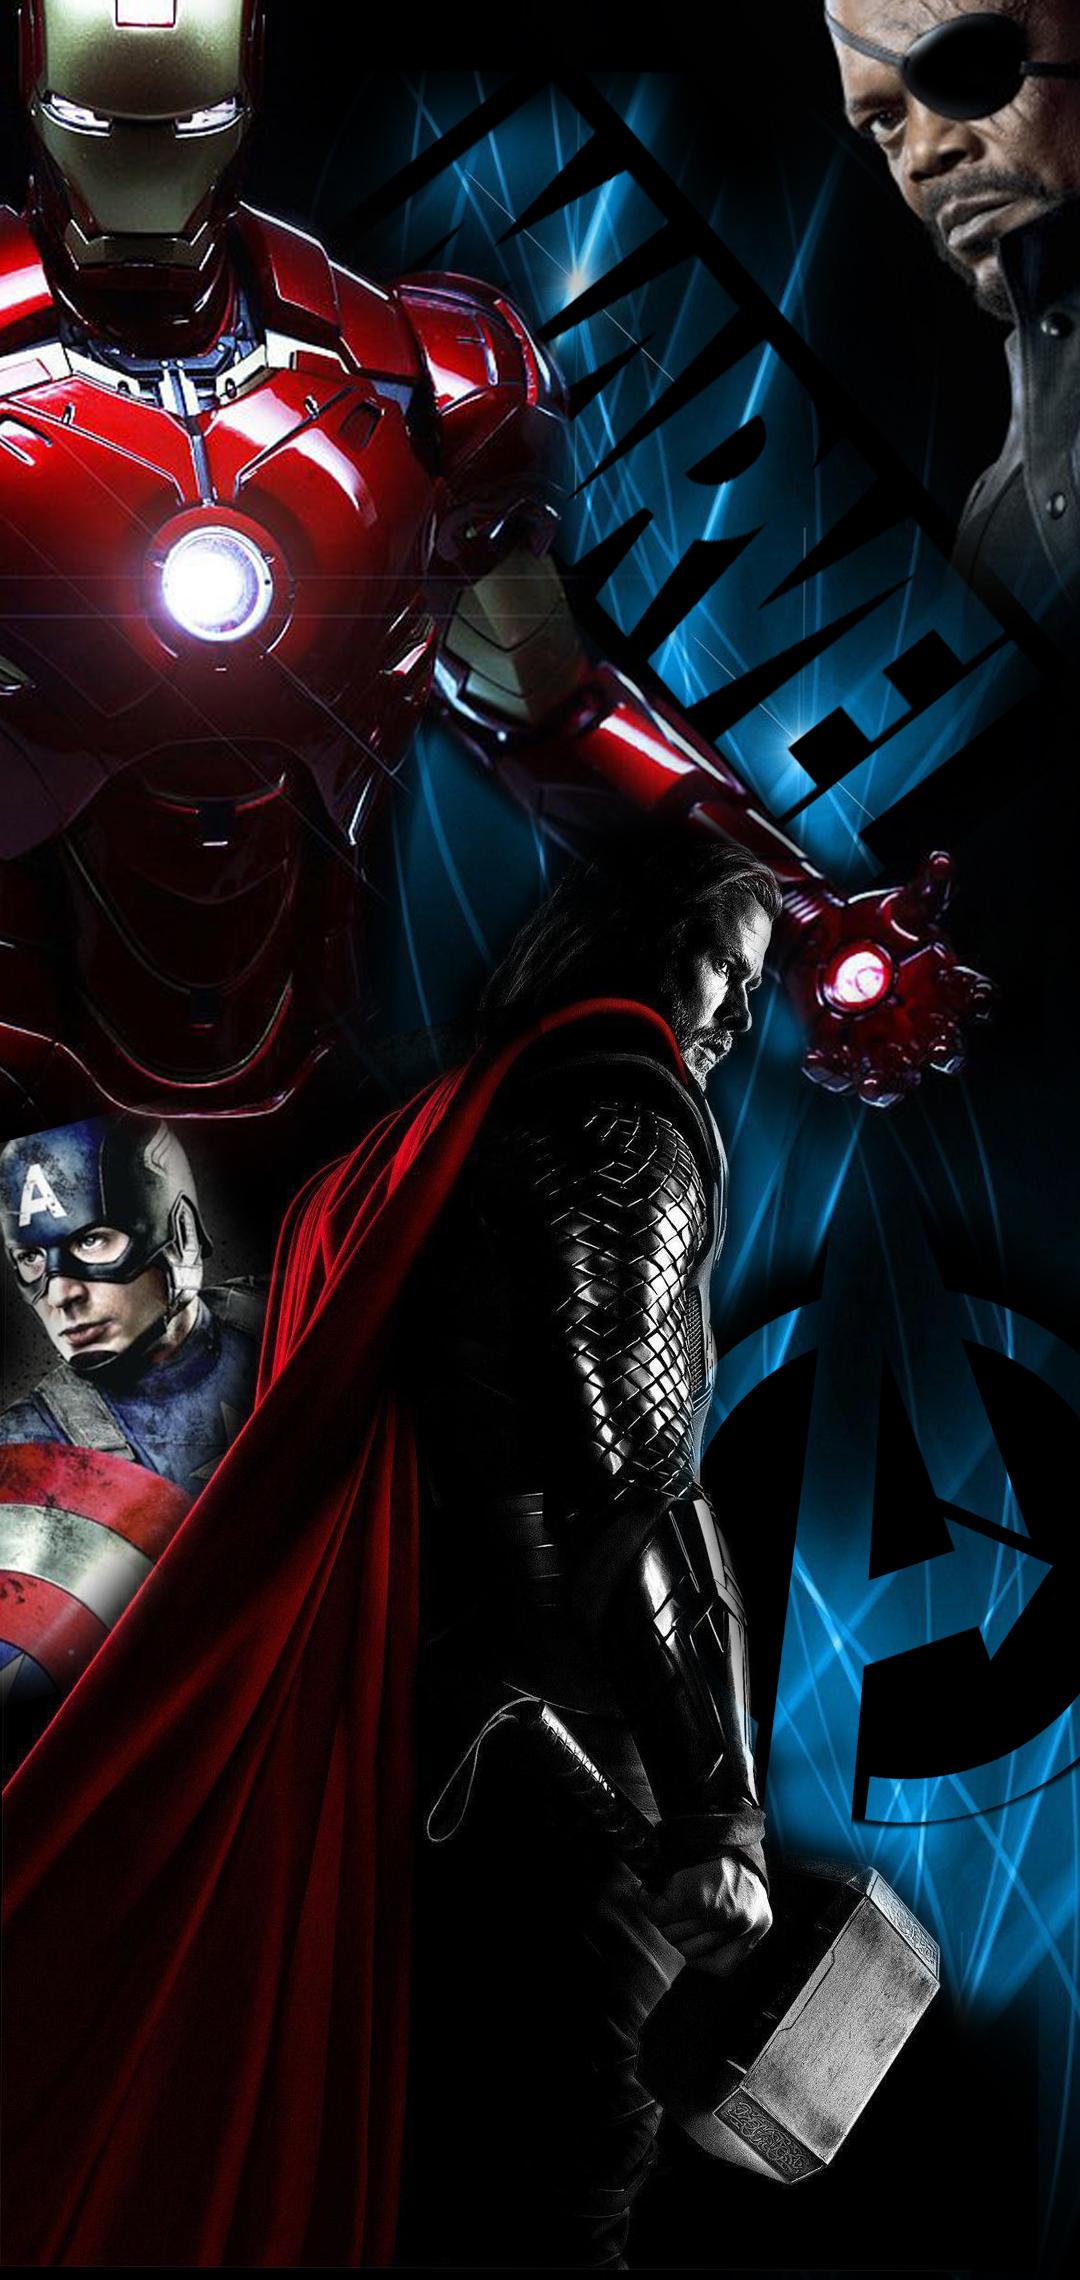 Marvel's Avengers Are Ready Galaxy S10 Hole Punch Wallpaper